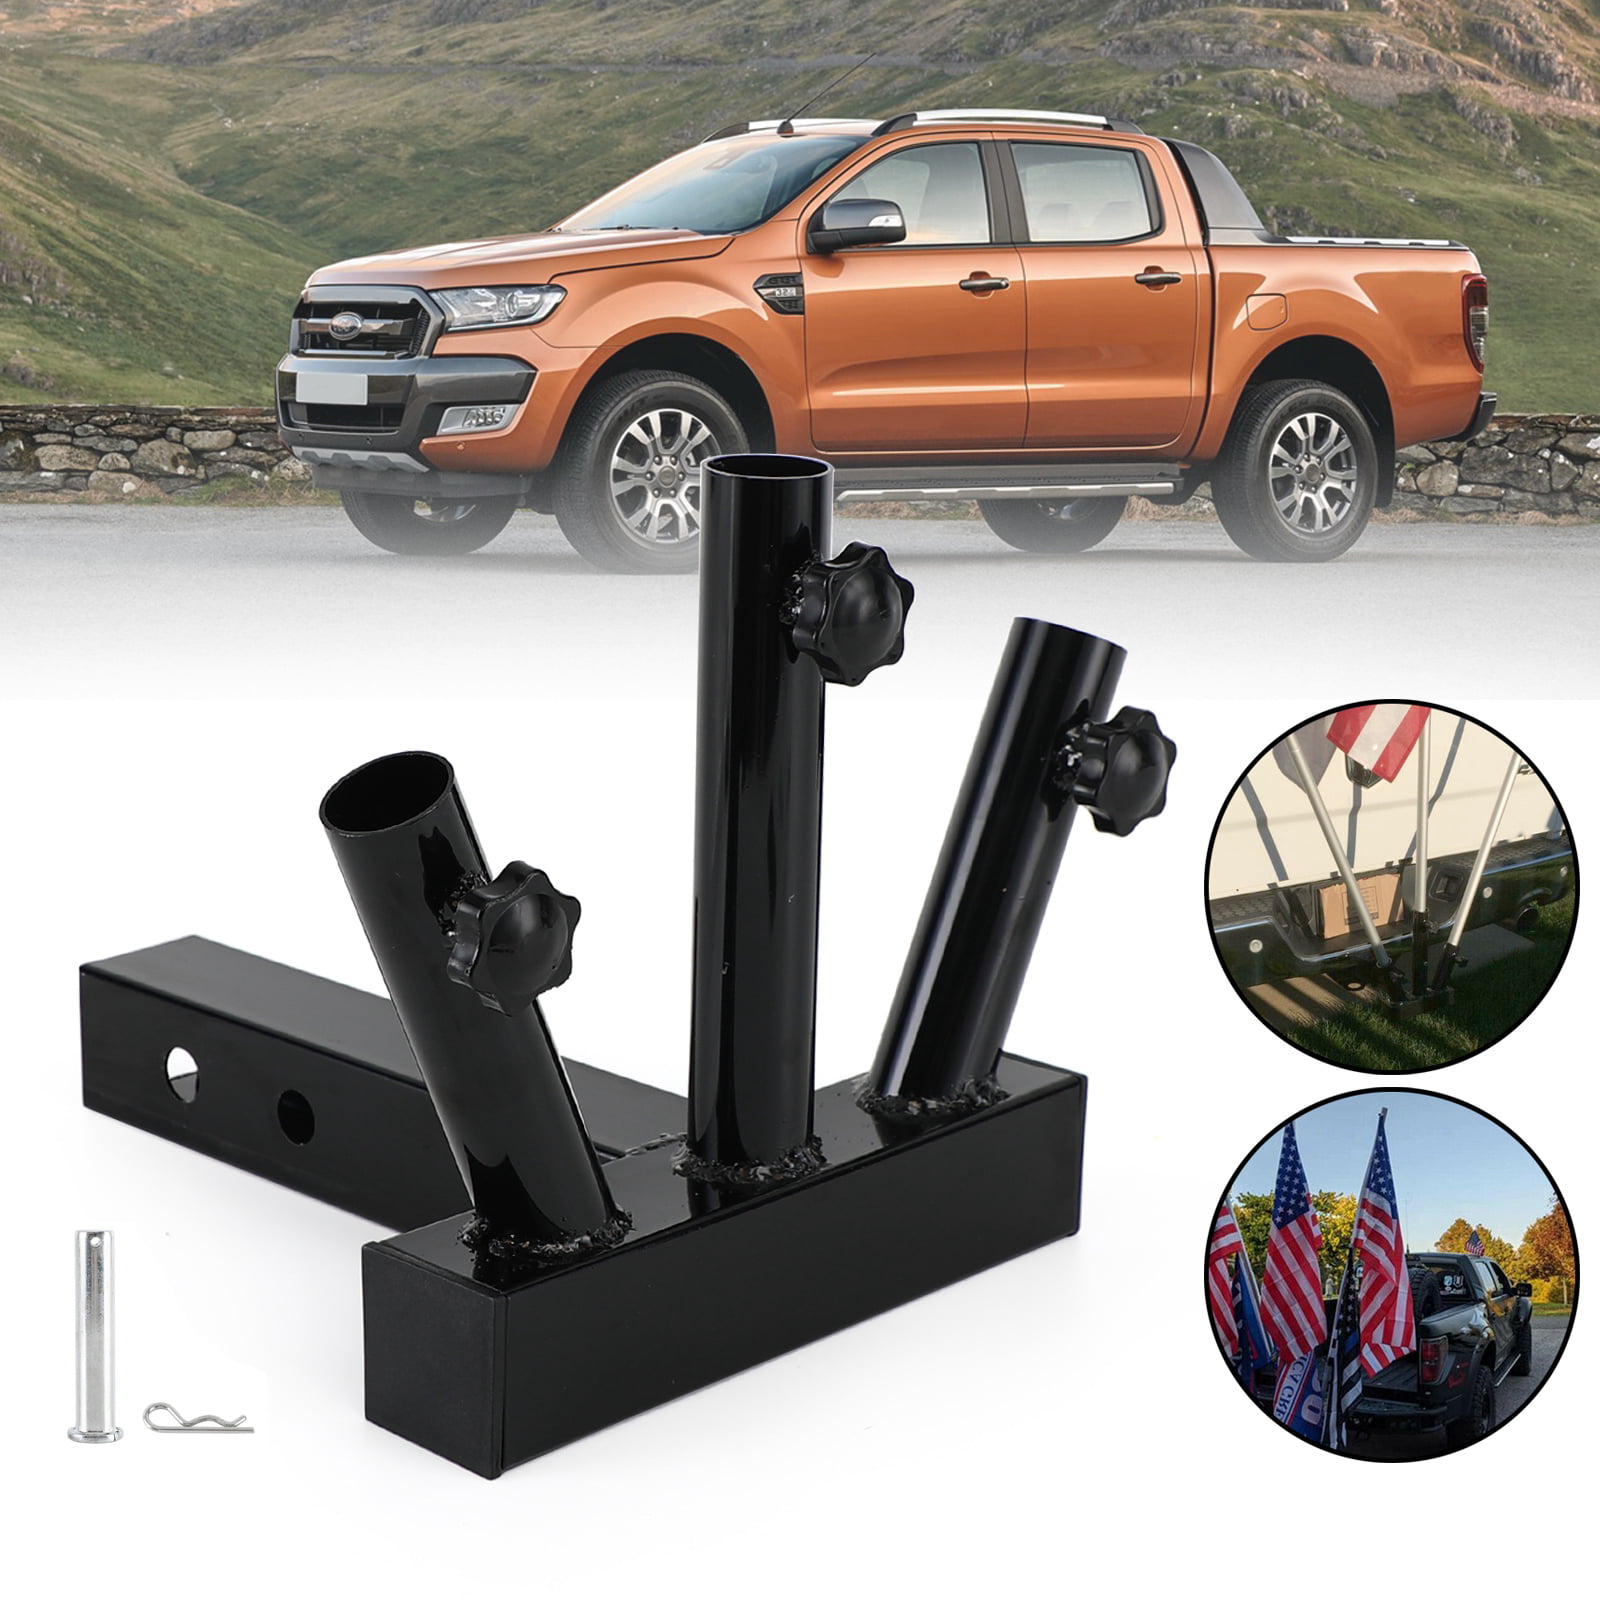 Service First Premium Hitch Truck Mount for 2-3 Flagpoles 